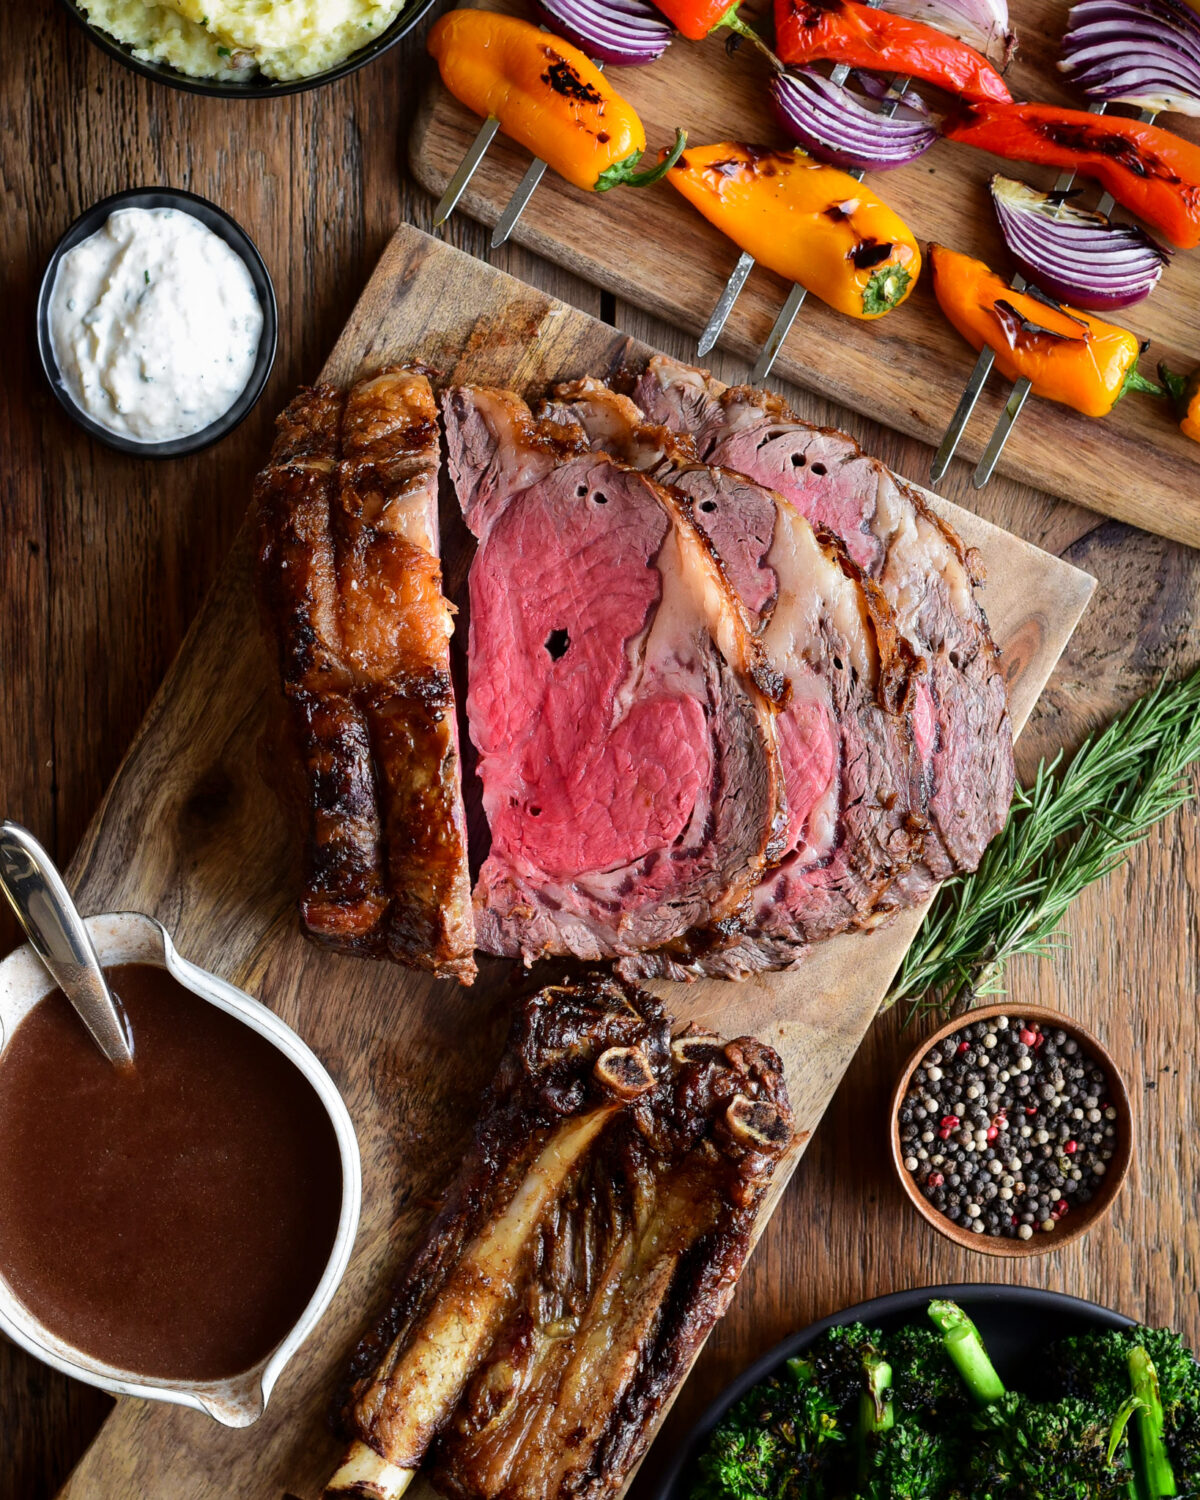 A sliced rotisserie prime rib roast served with gravy, horseradish sauce, and grilled veggies.